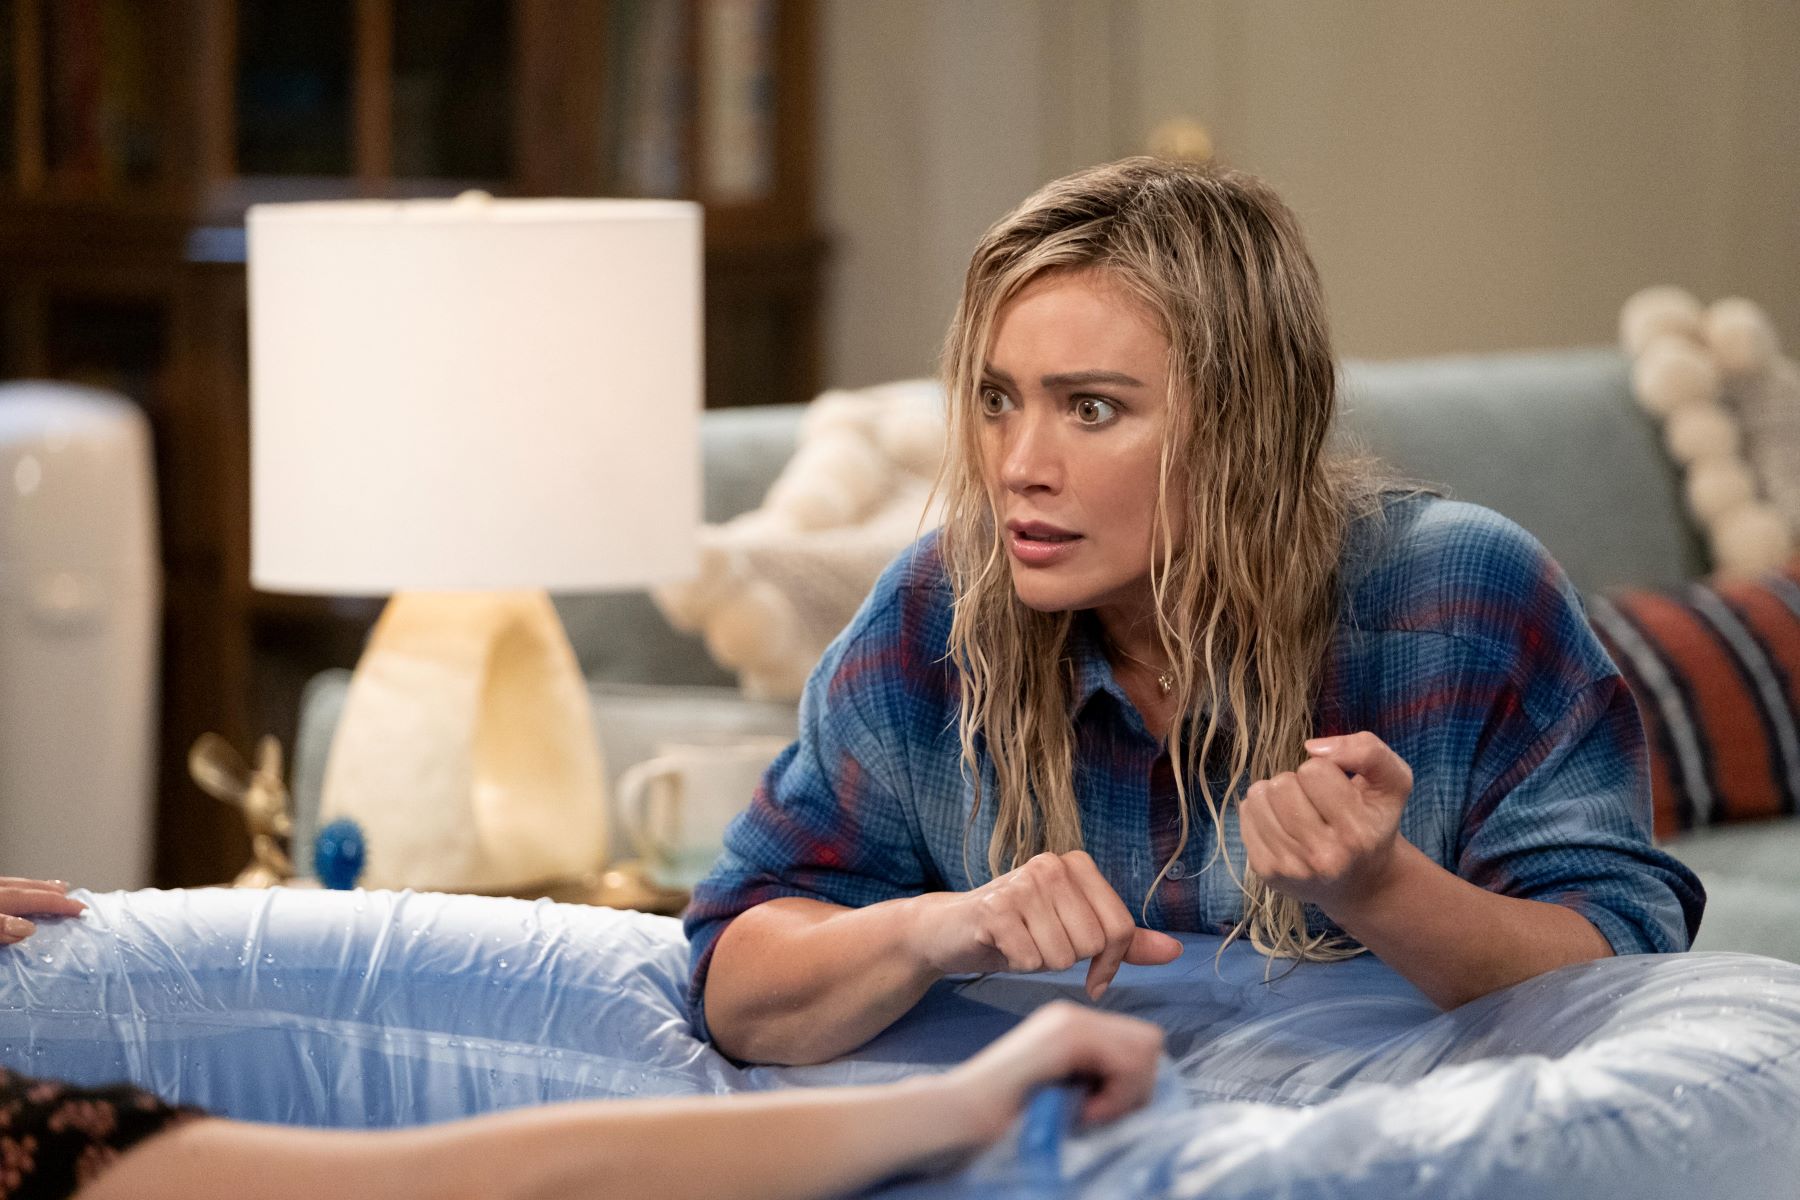 ‘How I Met Your Father’: Hilary Duff Reveals Sophie Is a ‘Sociopathic Liar’ in Season 2